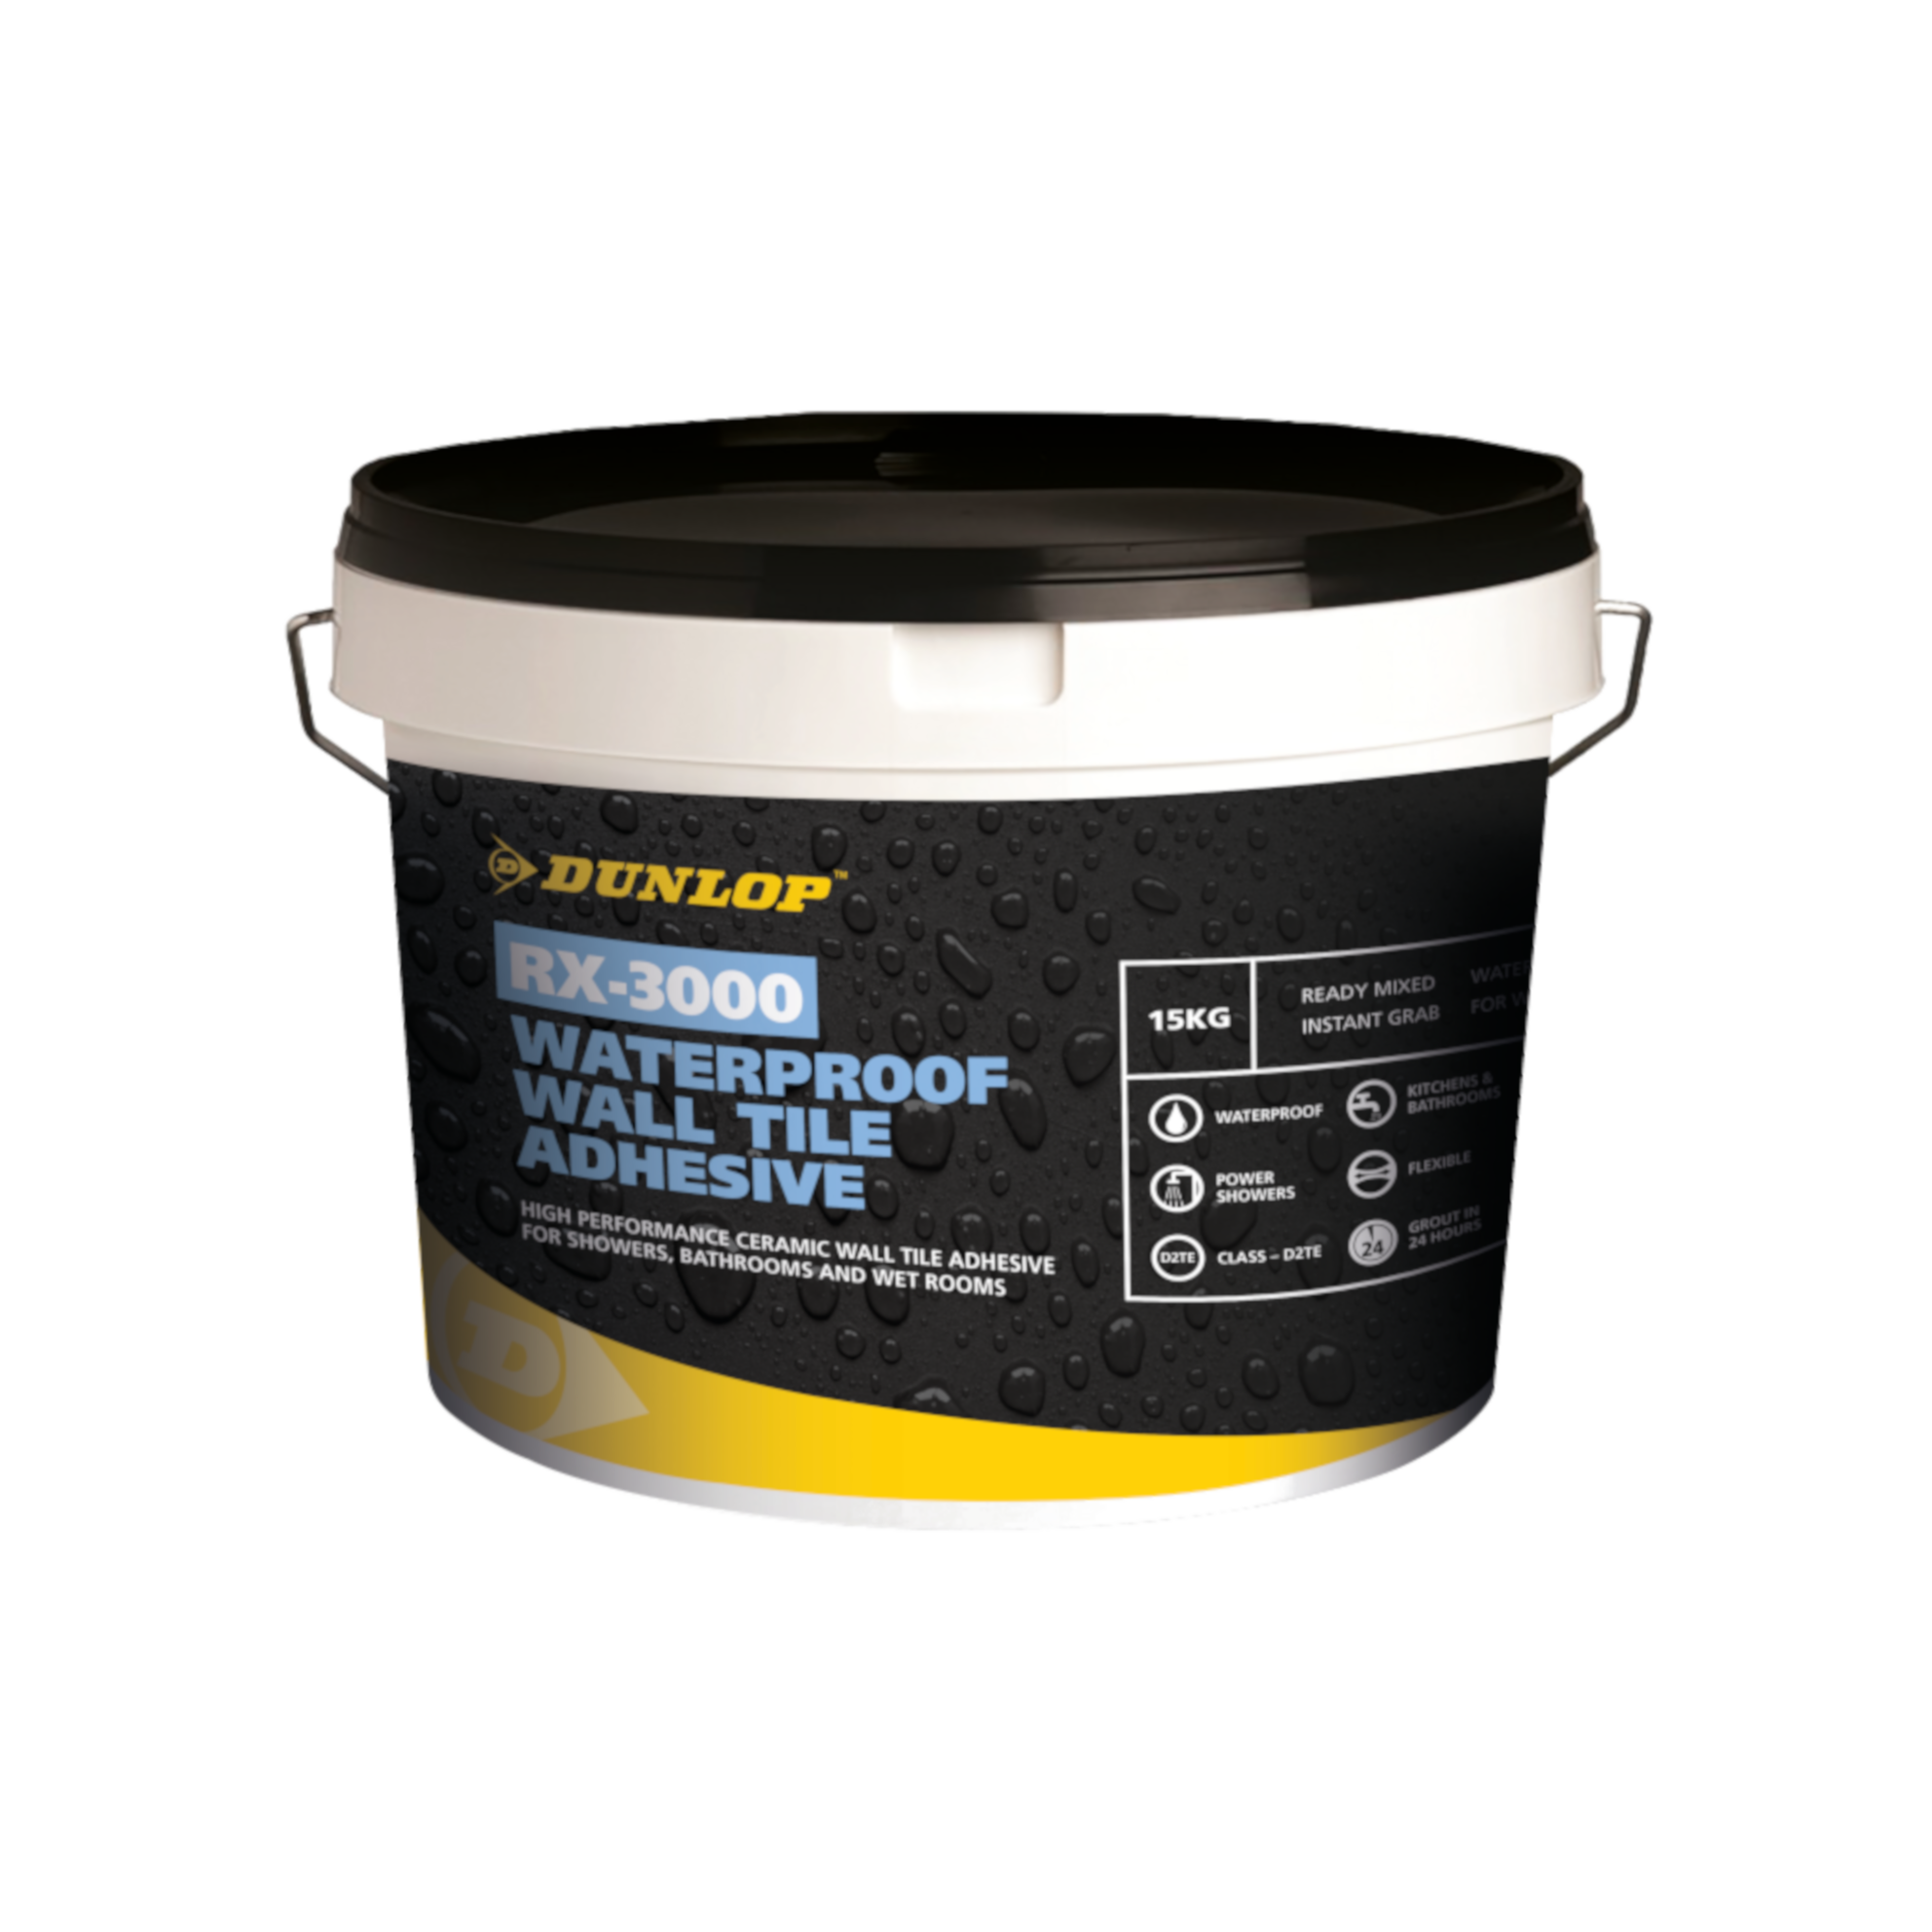 Waterproof Ready Mixed Wall Tile Adhesive for Wet Areas